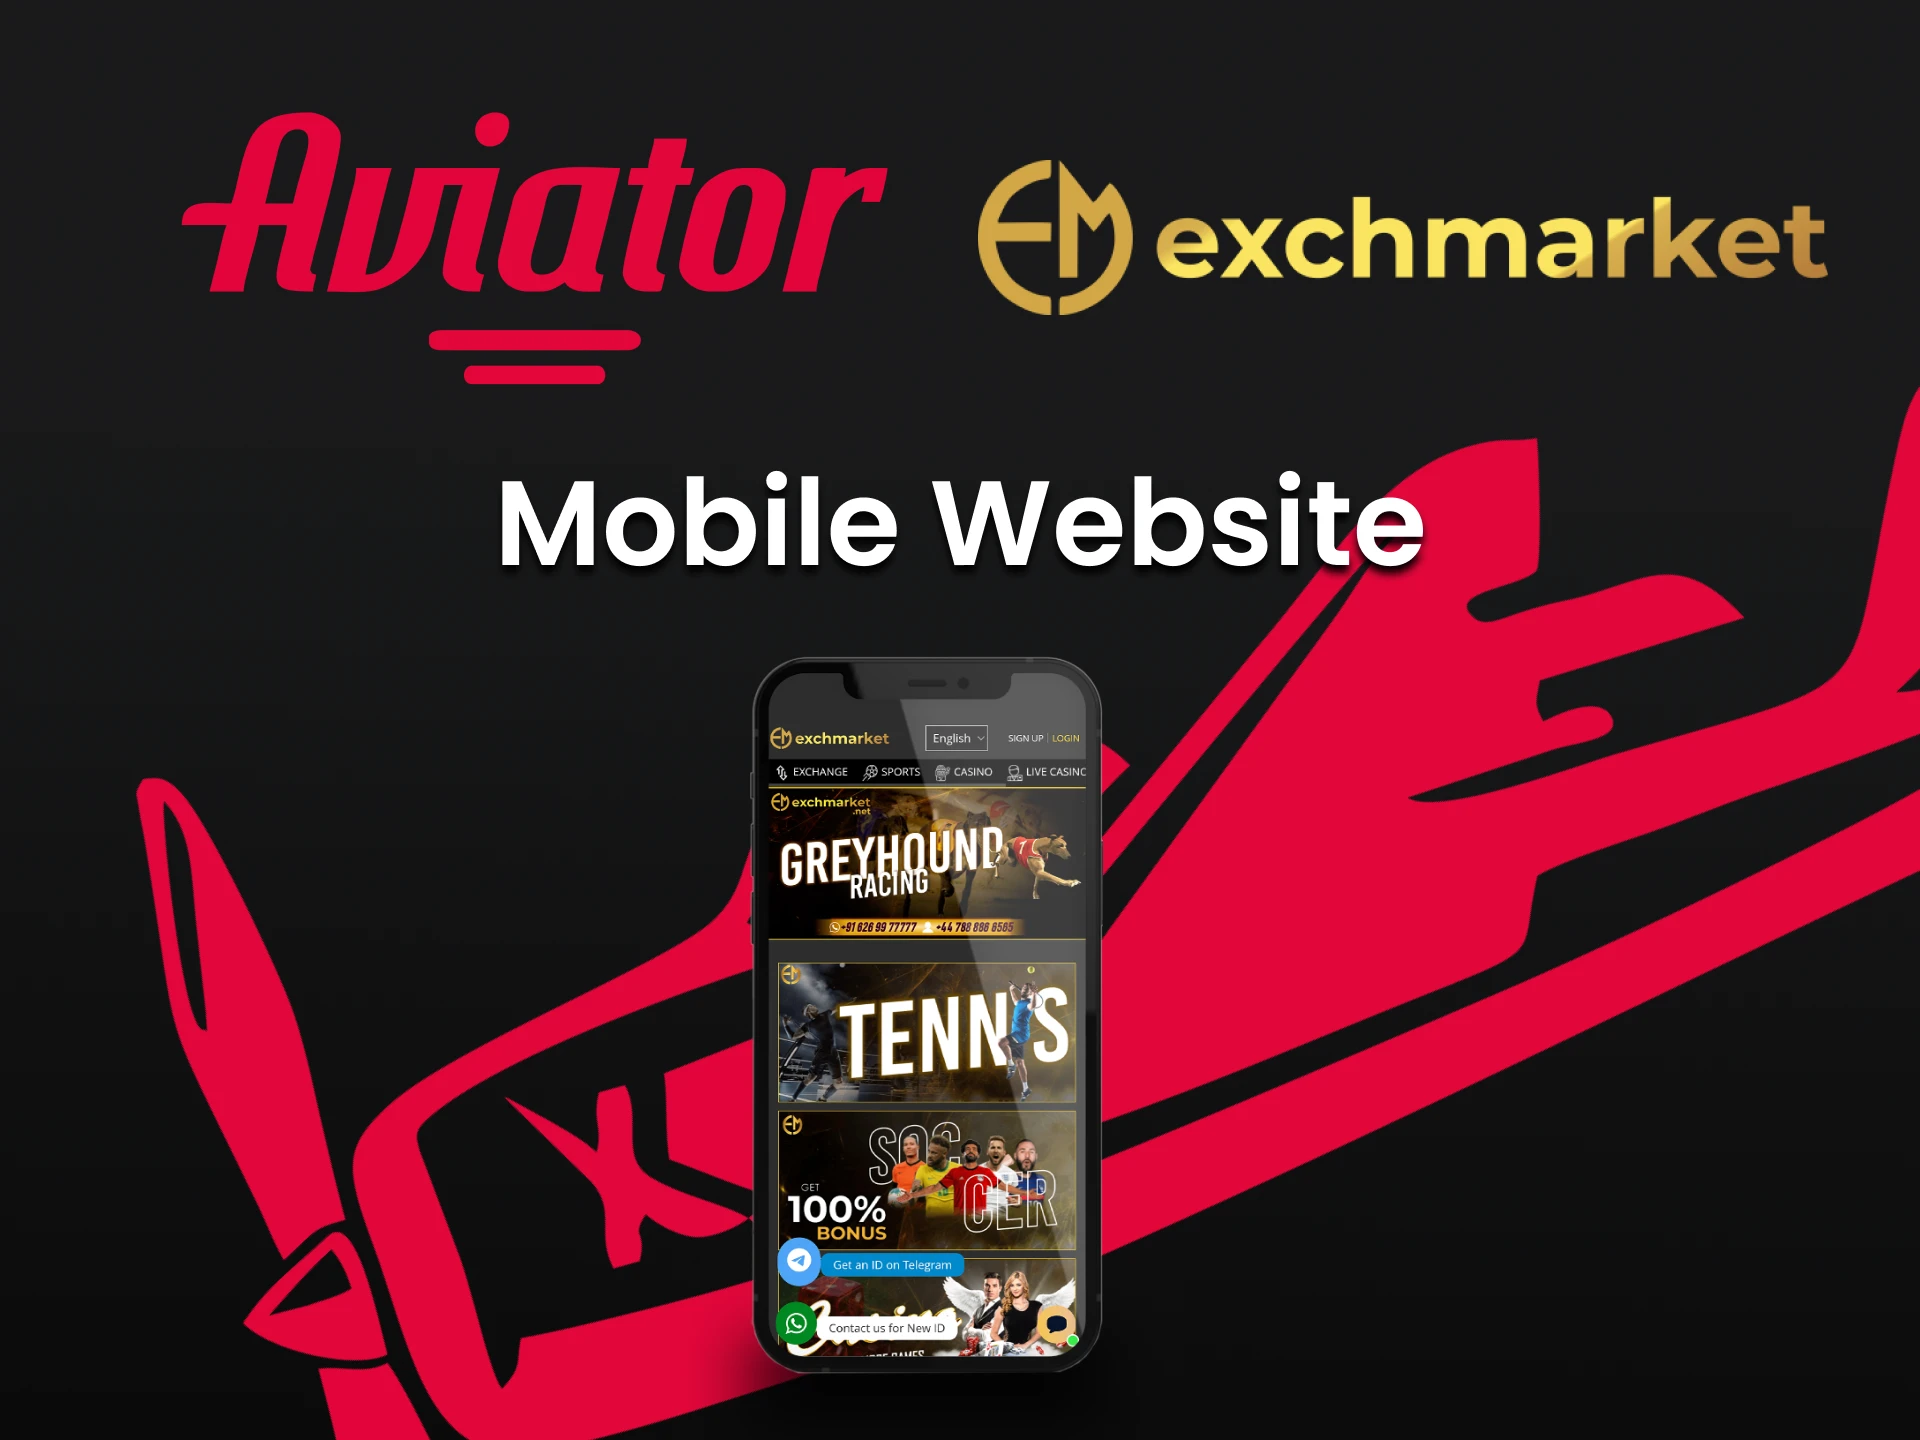 Use the Exchmarket service on your phone.